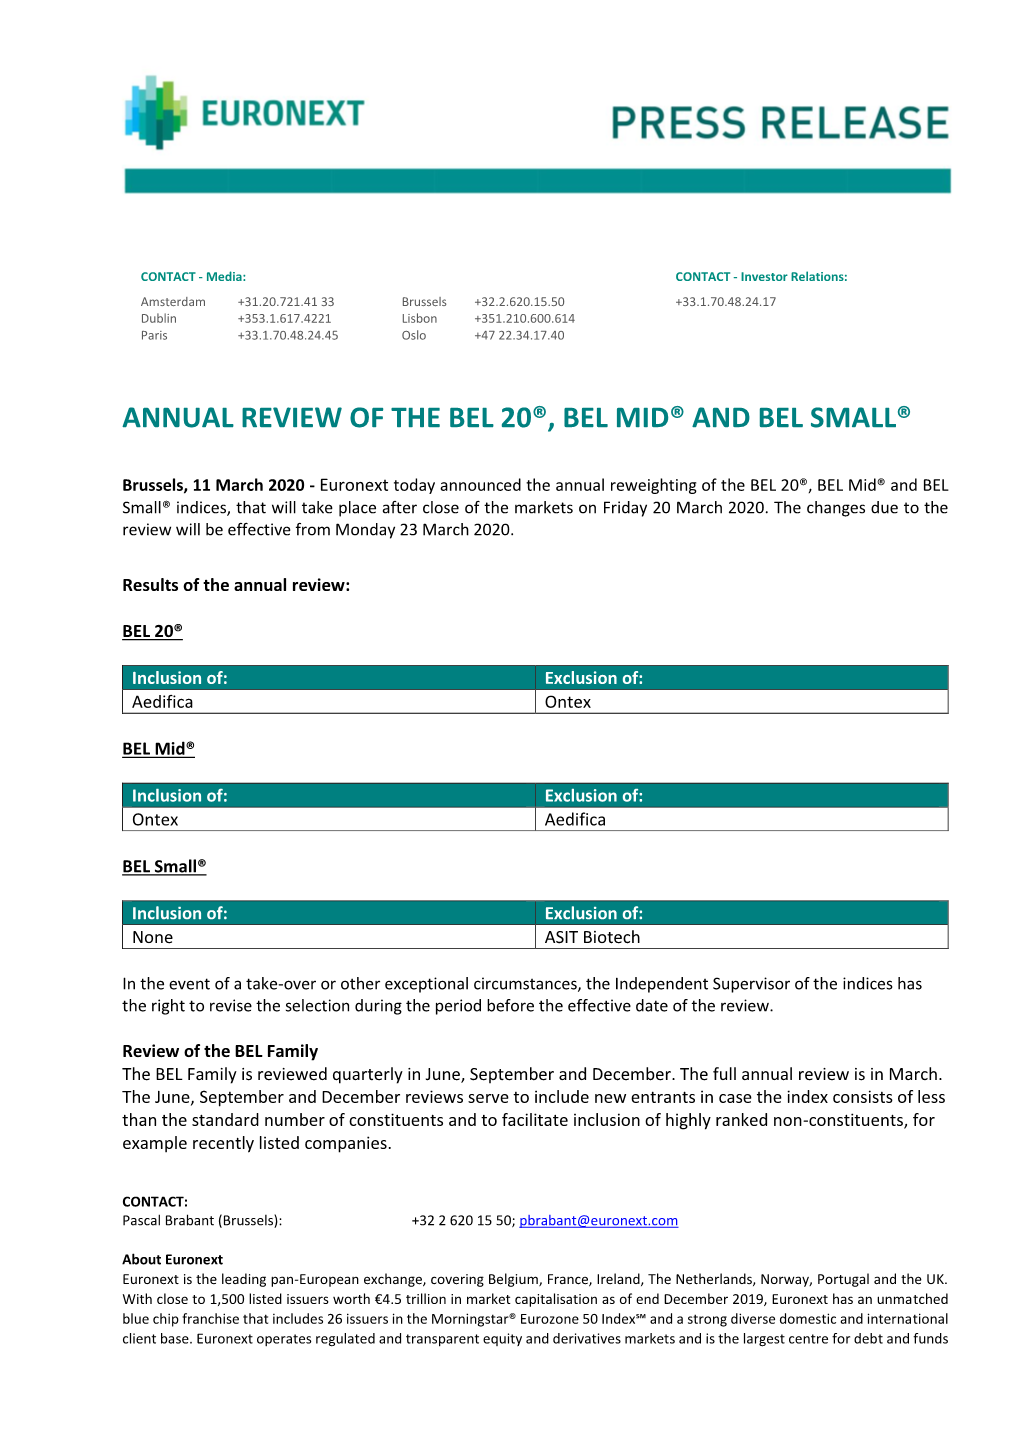 Annual Review of the Bel 20®, Bel Mid® and Bel Small®